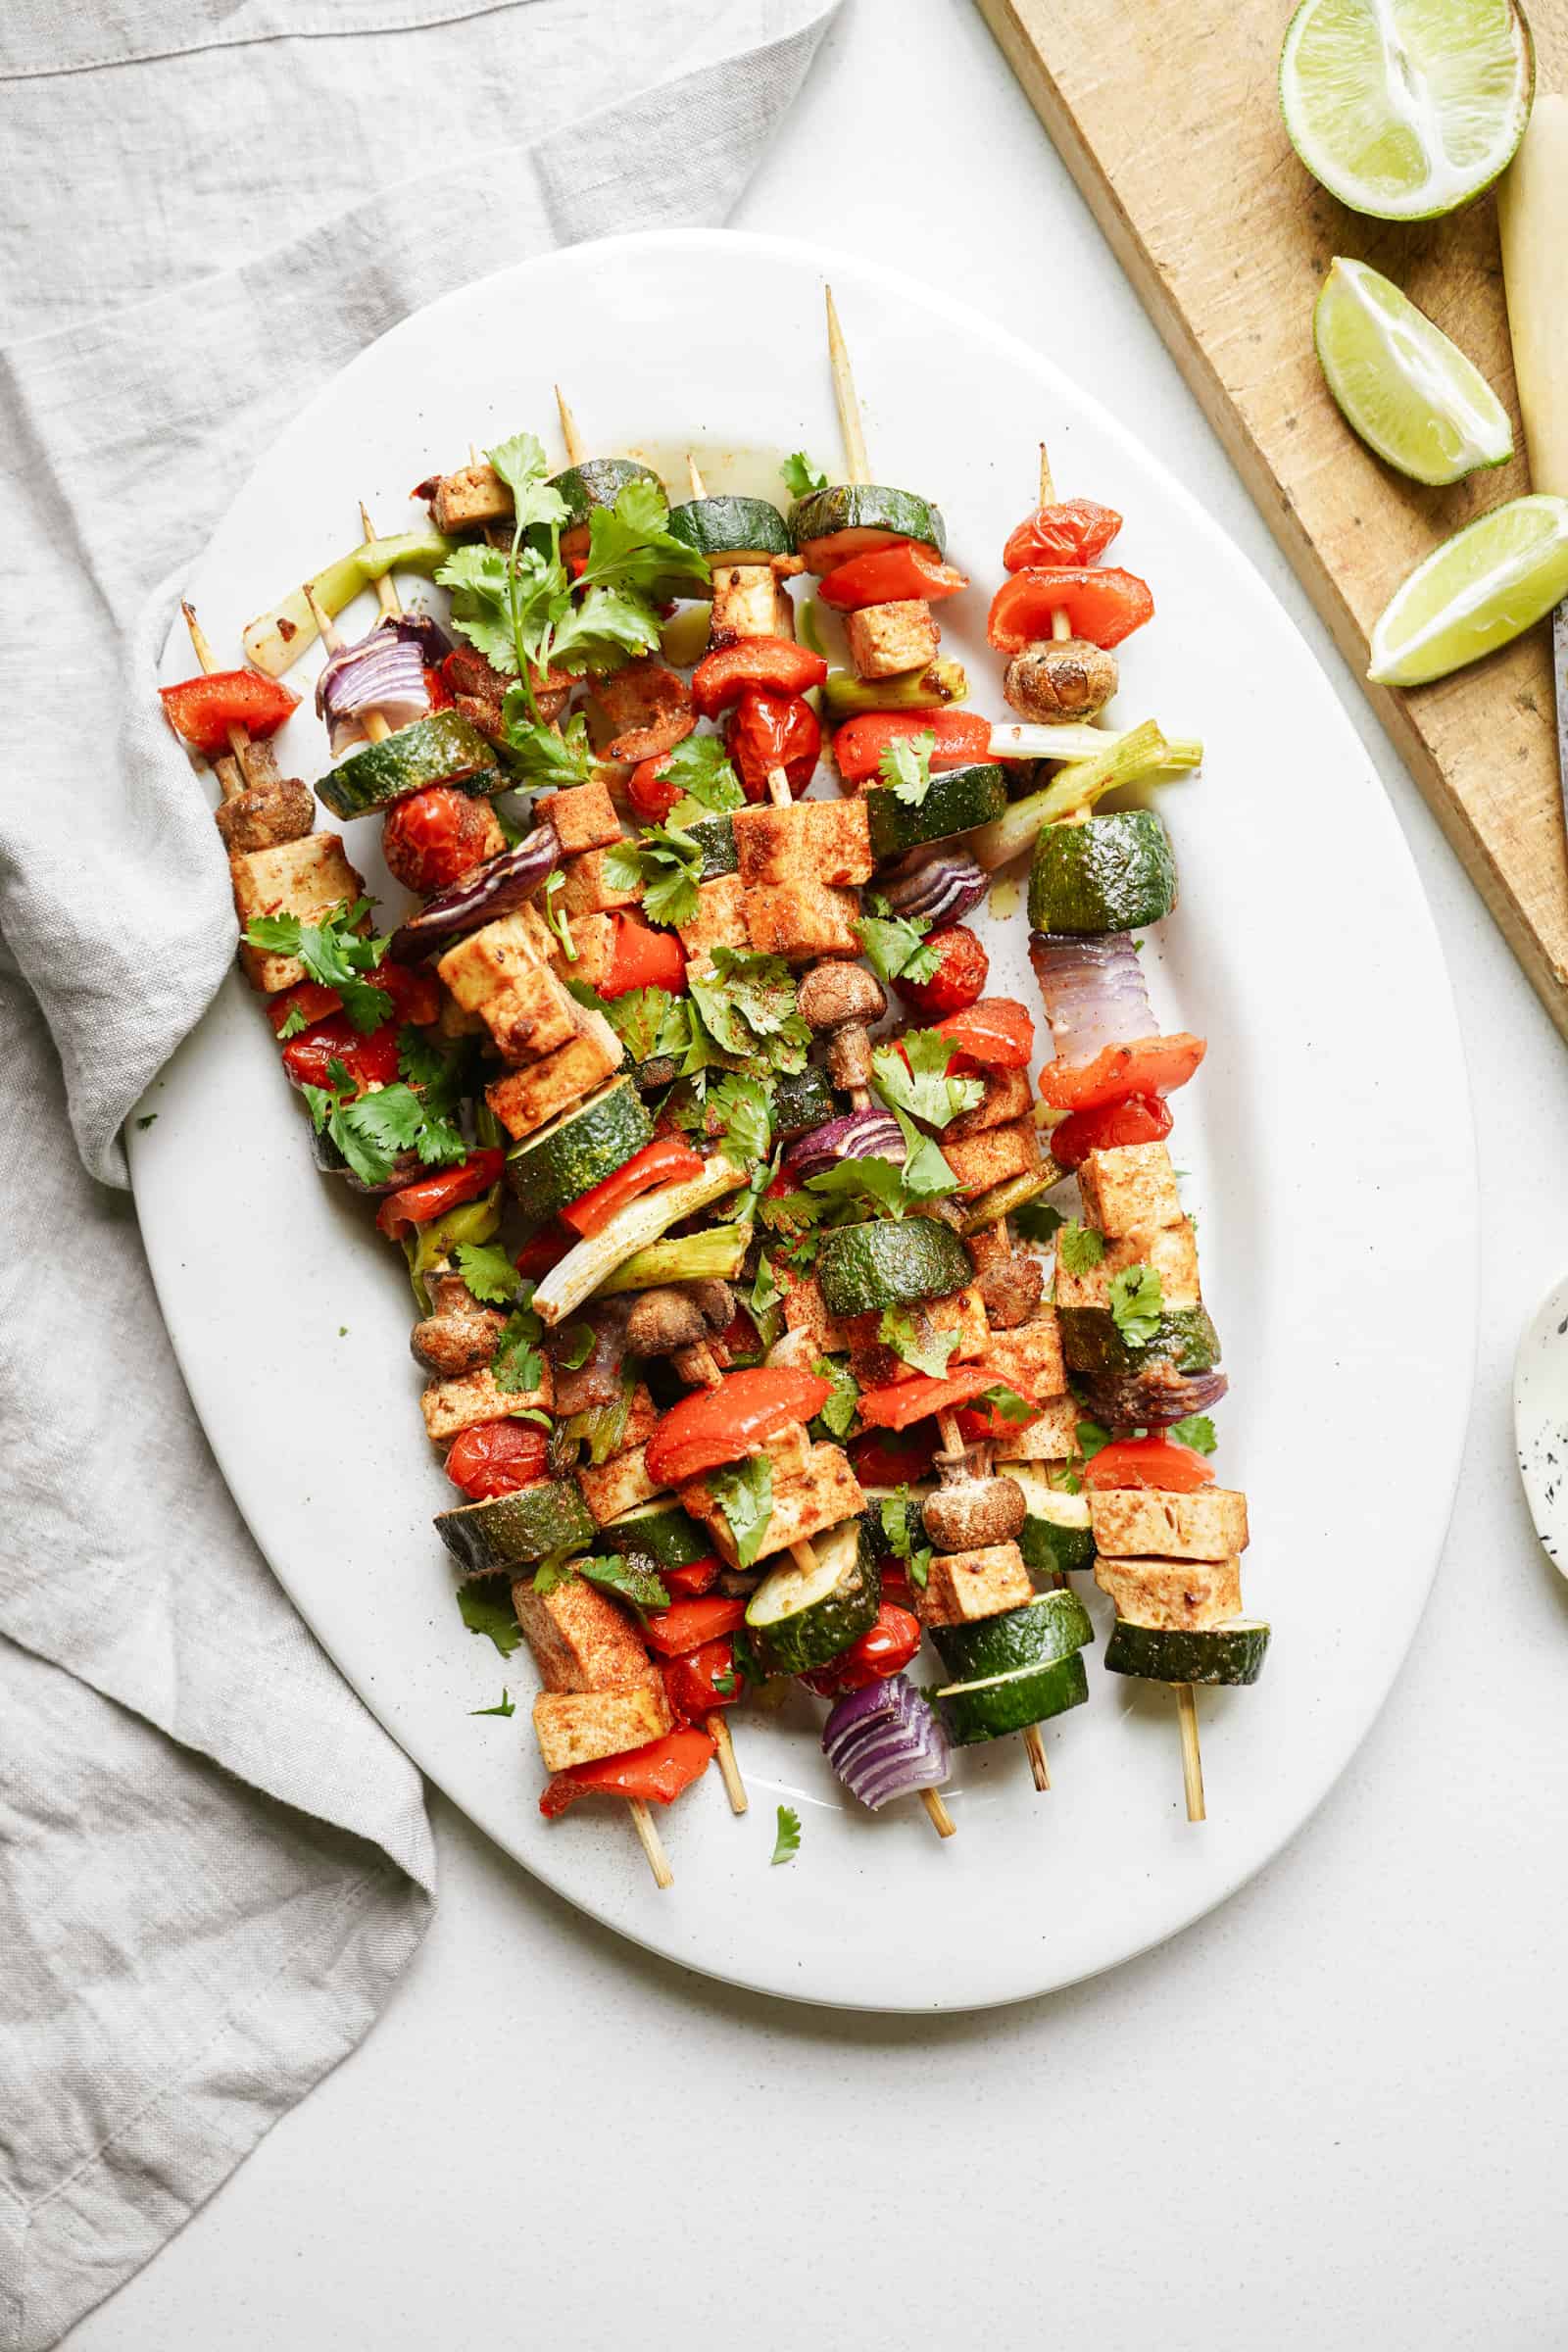 Marinated Tofu and Vegetable Skewers on a serving dish